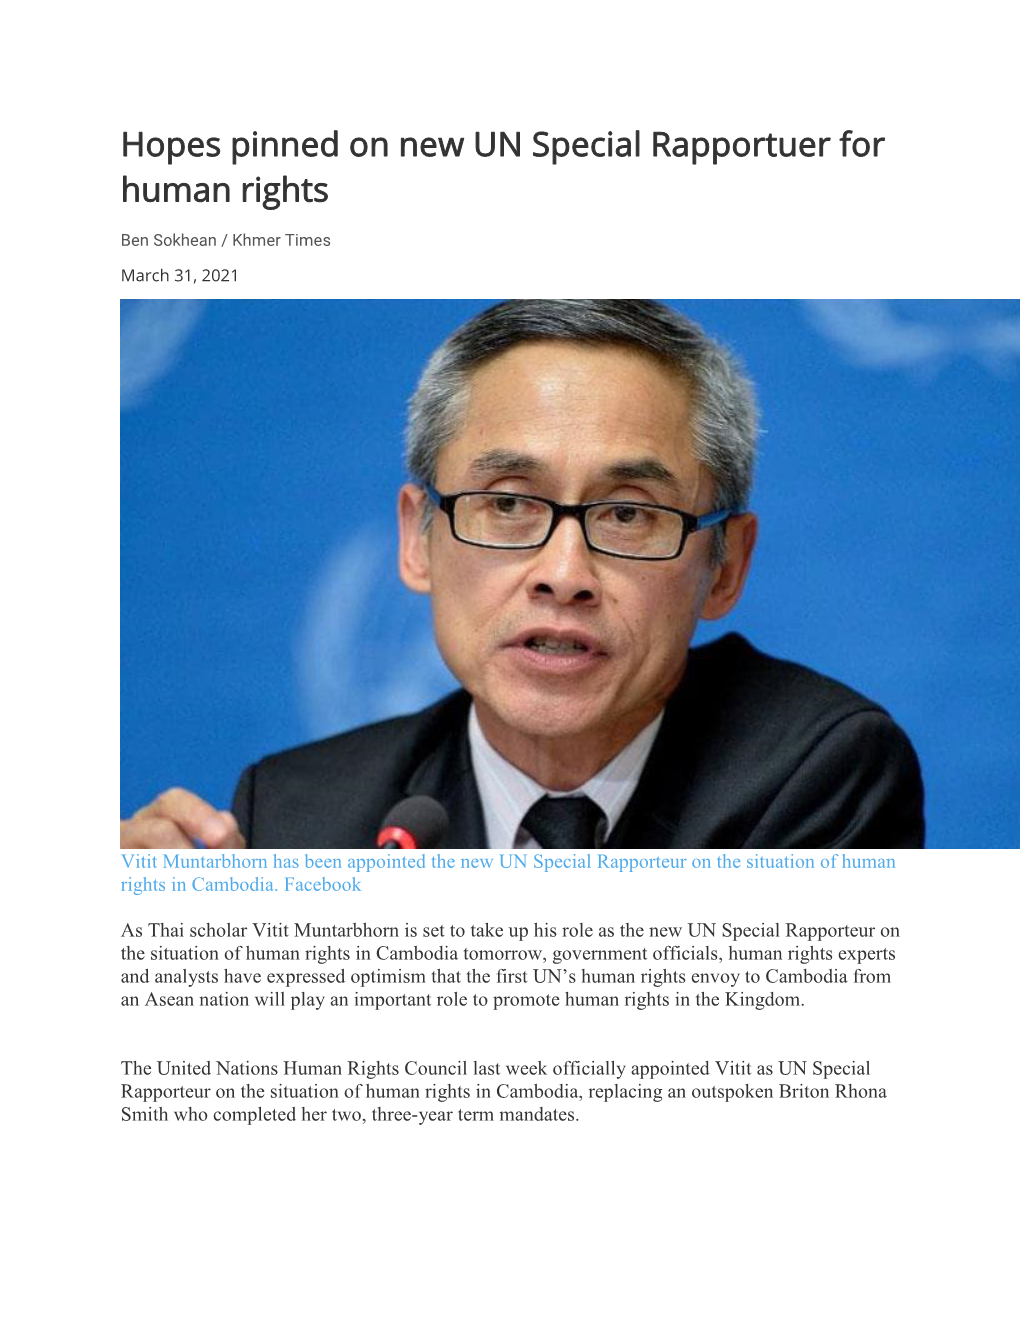 Hopes Pinned on New UN Special Rapportuer for Human Rights